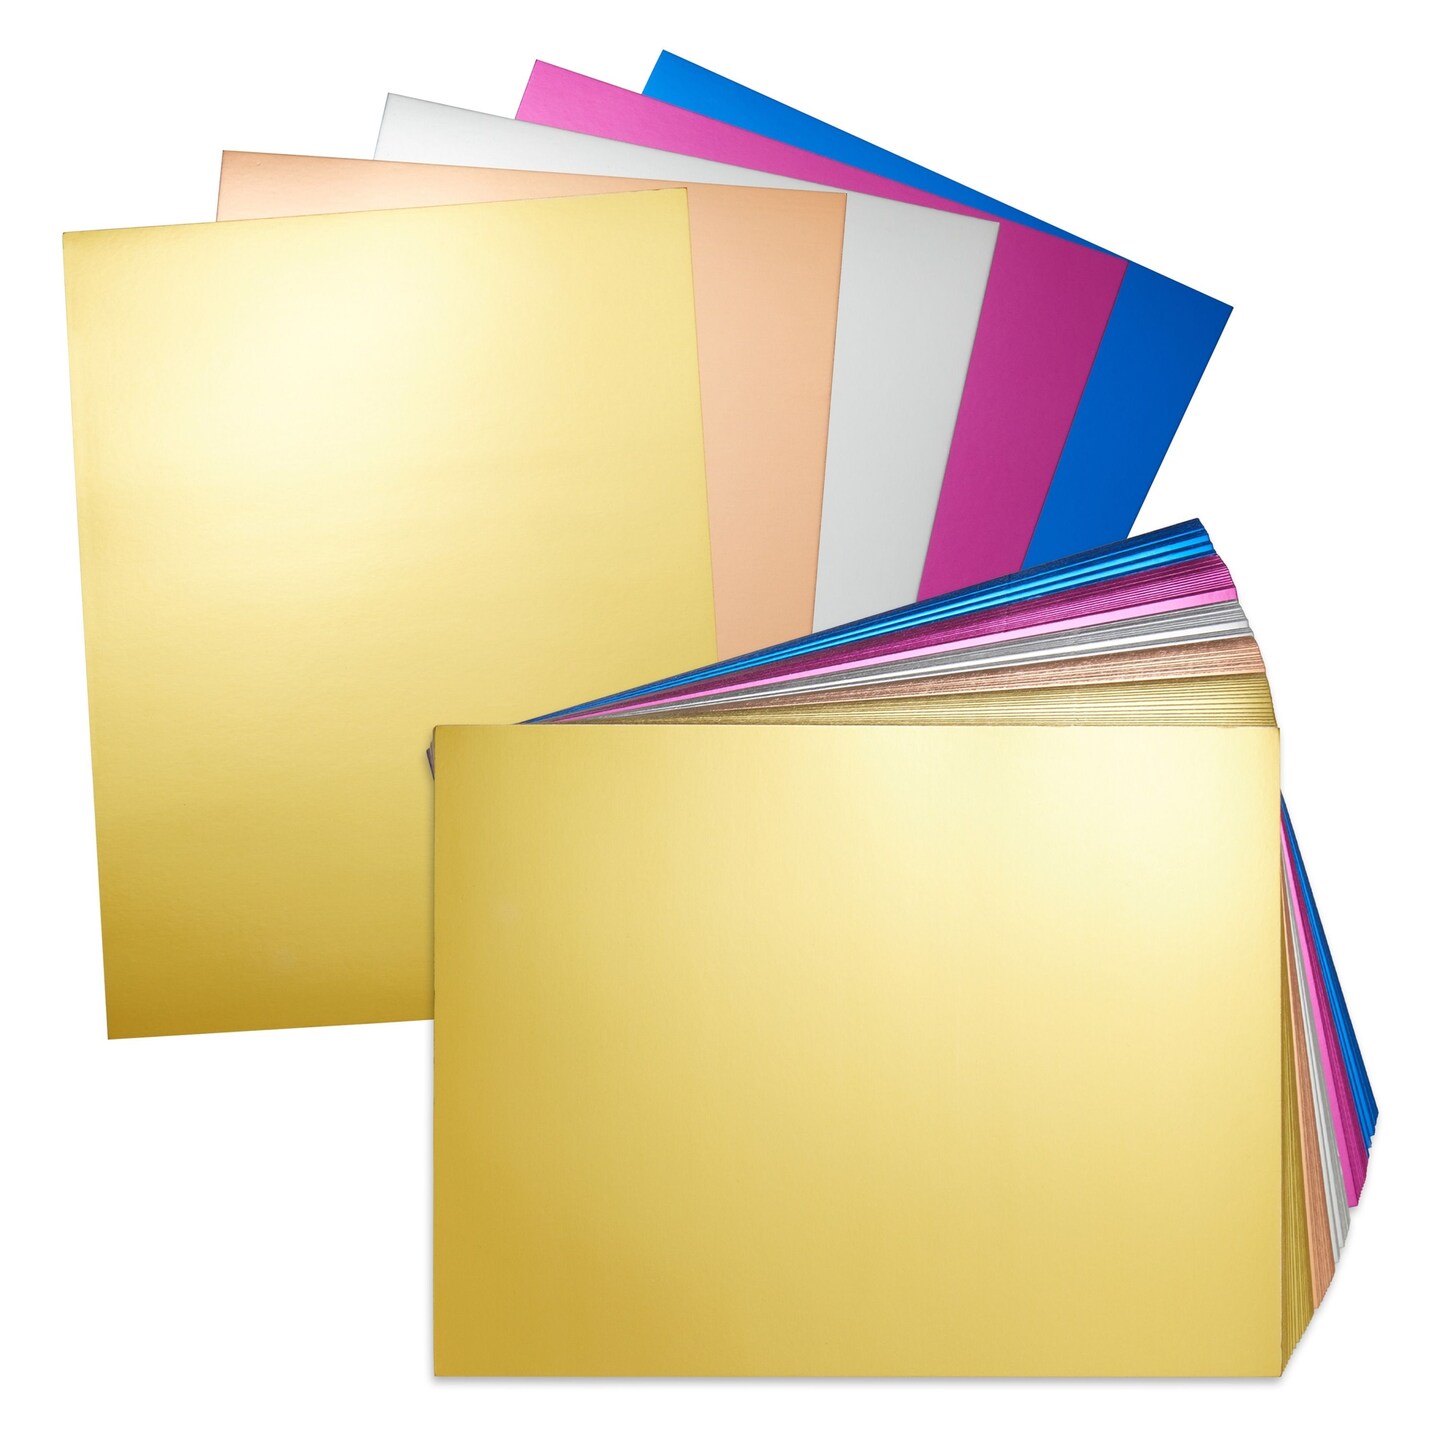 Reflective Metallic Cardstock Paper Sheets (Silver, 8.5 x 11.75 In, 50 Pack)